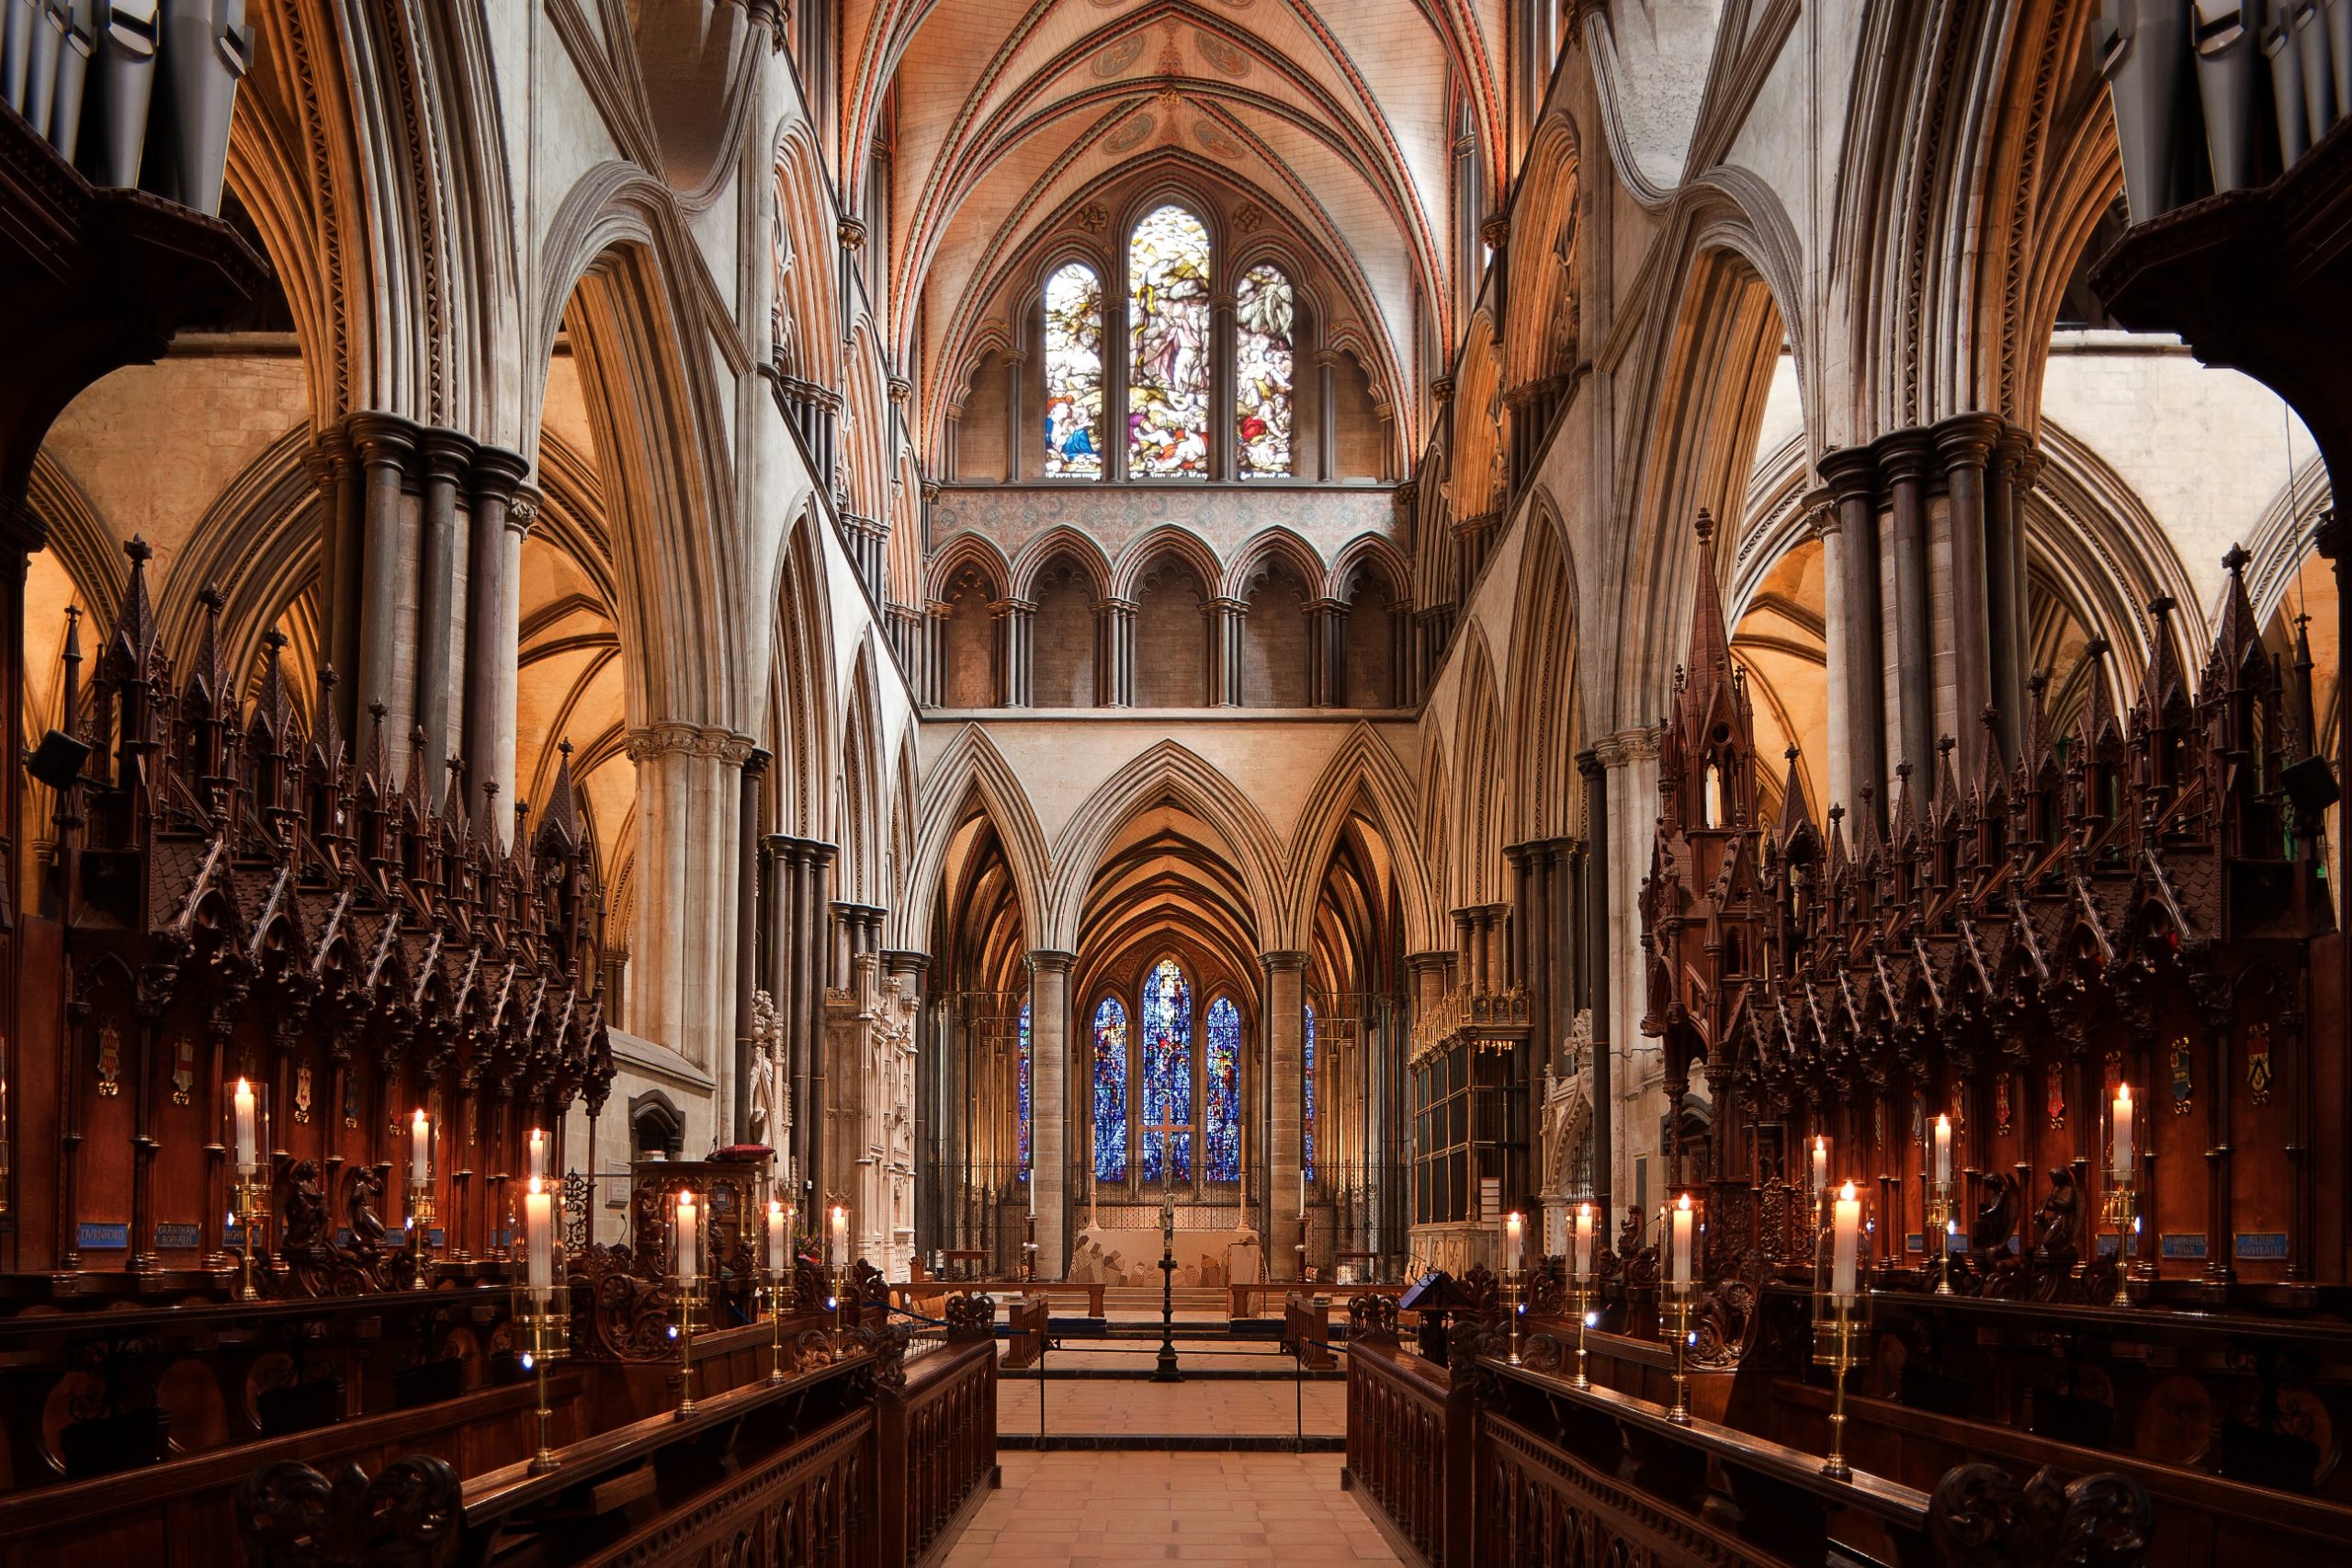 The quire at Salisbury Cathedral